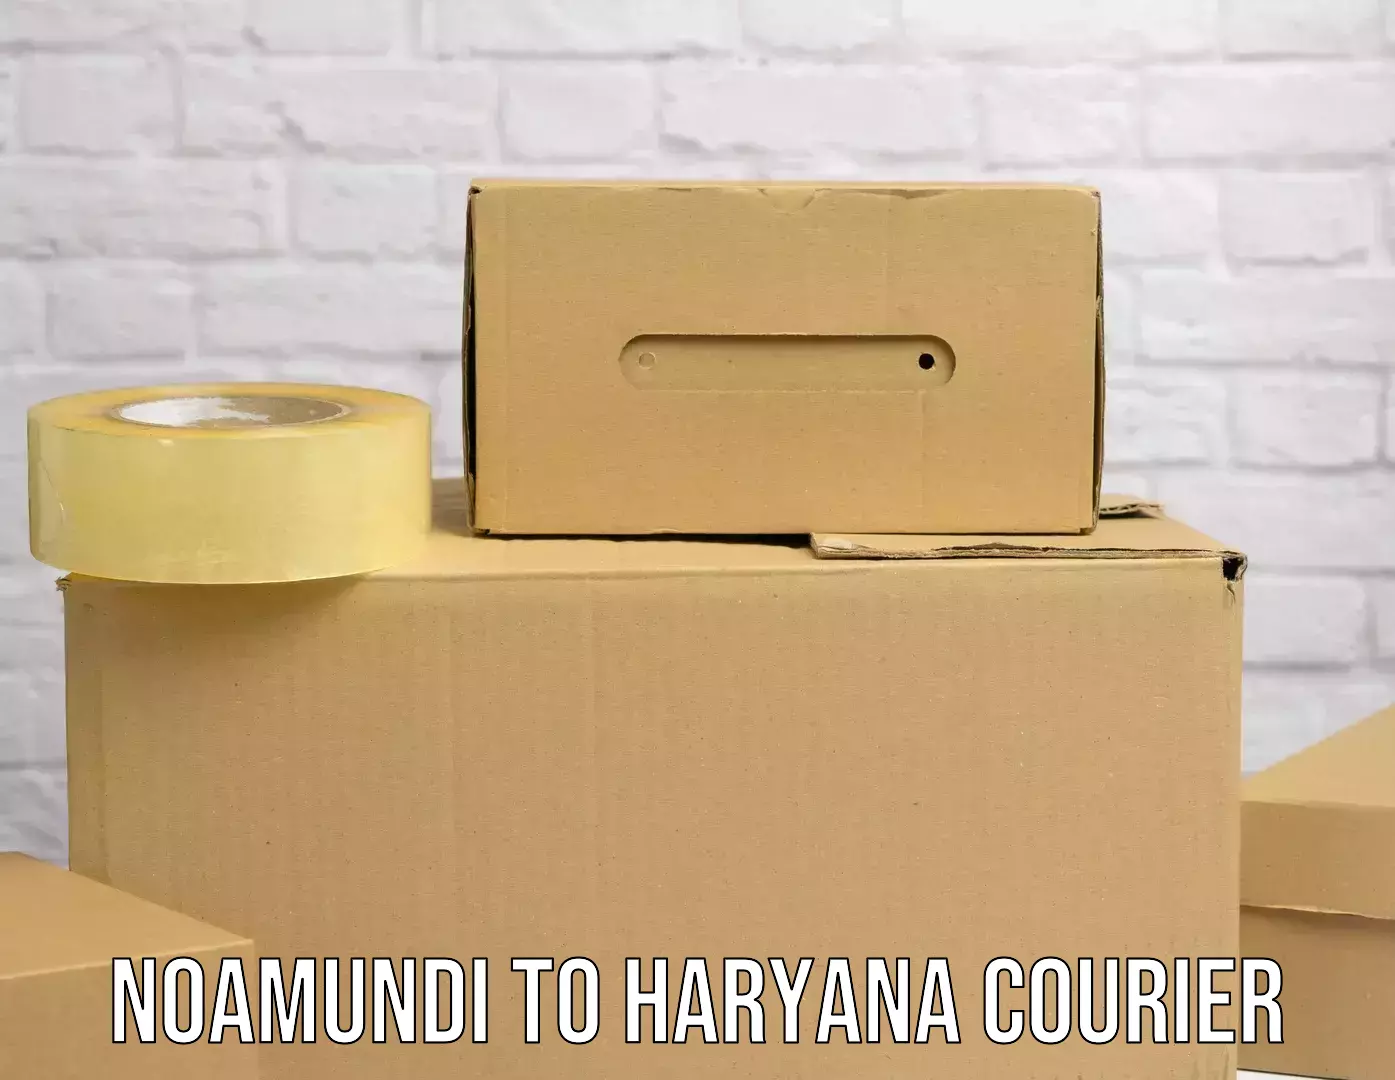 Package delivery network Noamundi to Haryana